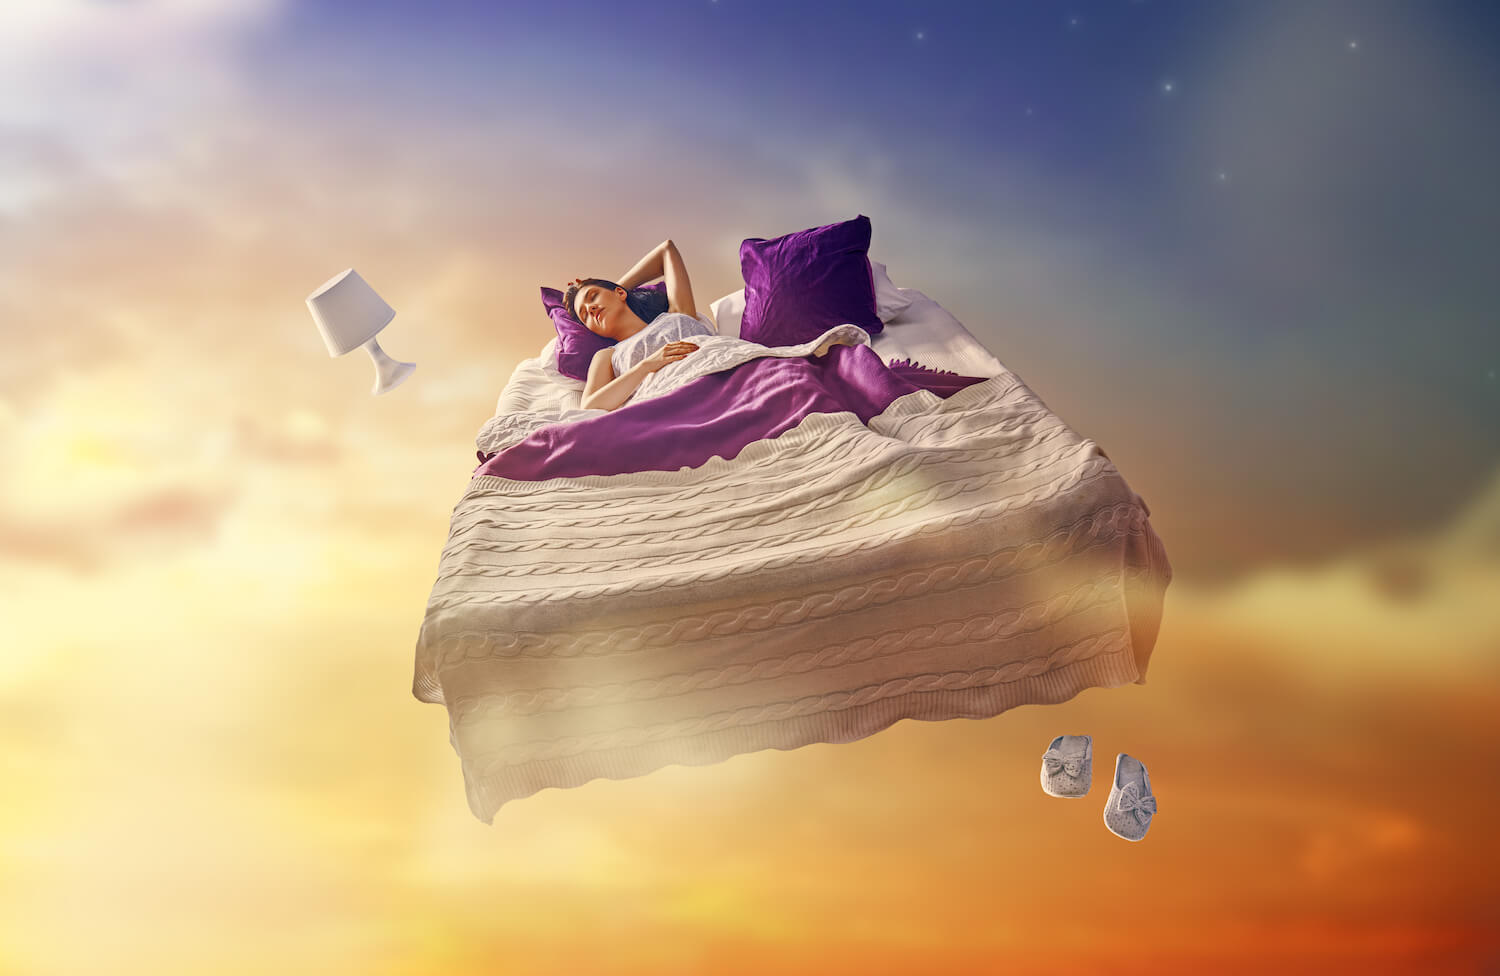 A lady sleeping on the bed in the air